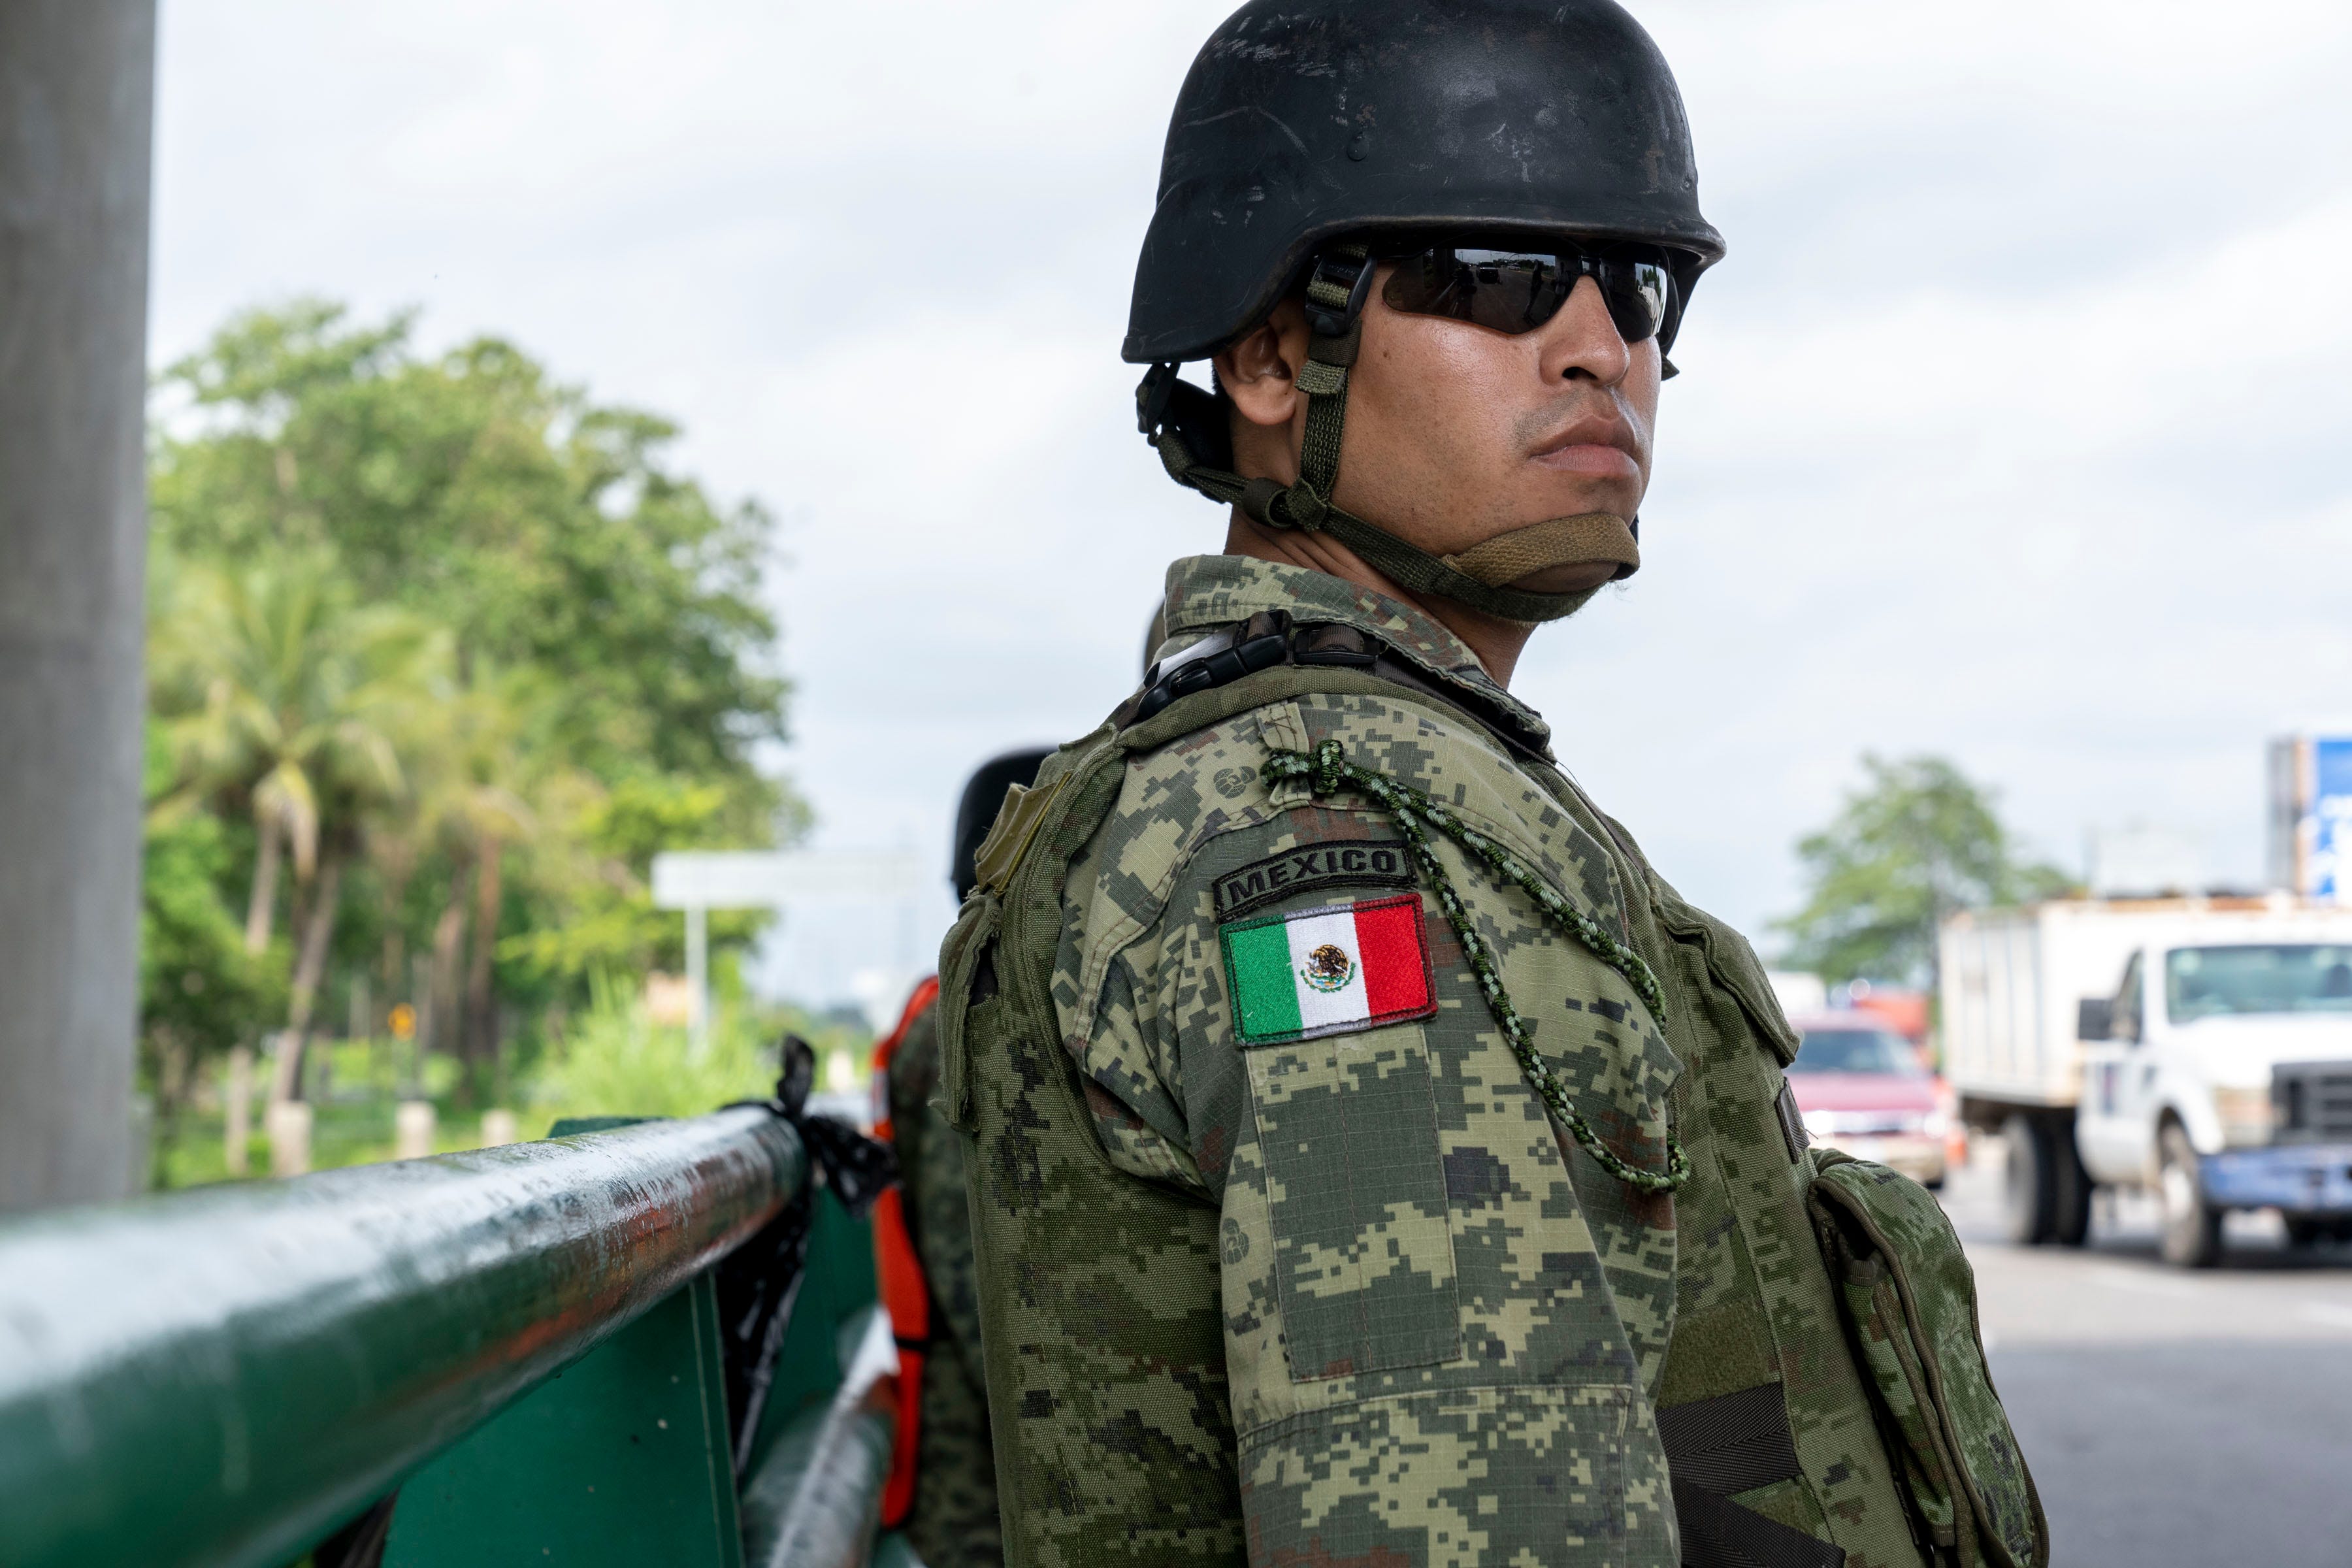 TAPACHULA, Mexico – A member of Mexico’s National Guard stands watch as a Mexican immigration officer boards a bus headed north on the Pacific Coast Highway near Tapachula. In June, Mexico’s President Andrés Manuel López Obrador, under pressure from the U.S., sent National Guard troops to help immigration authorities block migrants from Central America from reaching the U.S.